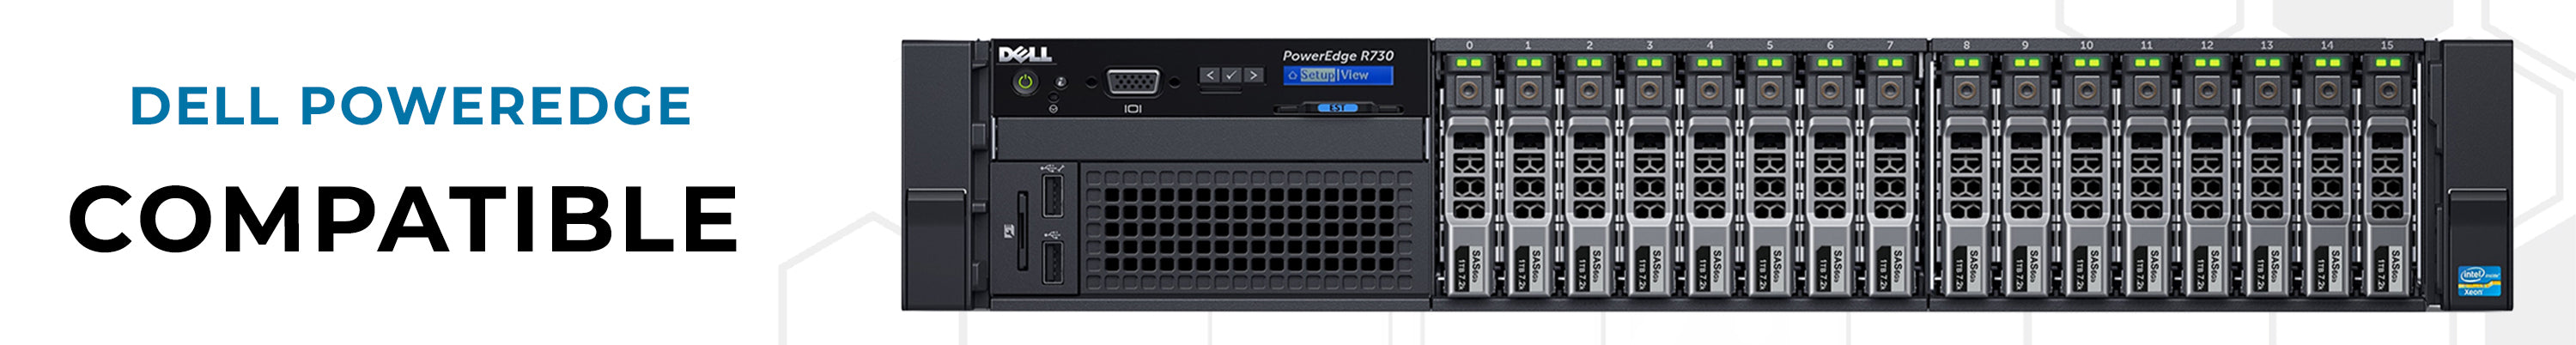 poweredge compatible sff options